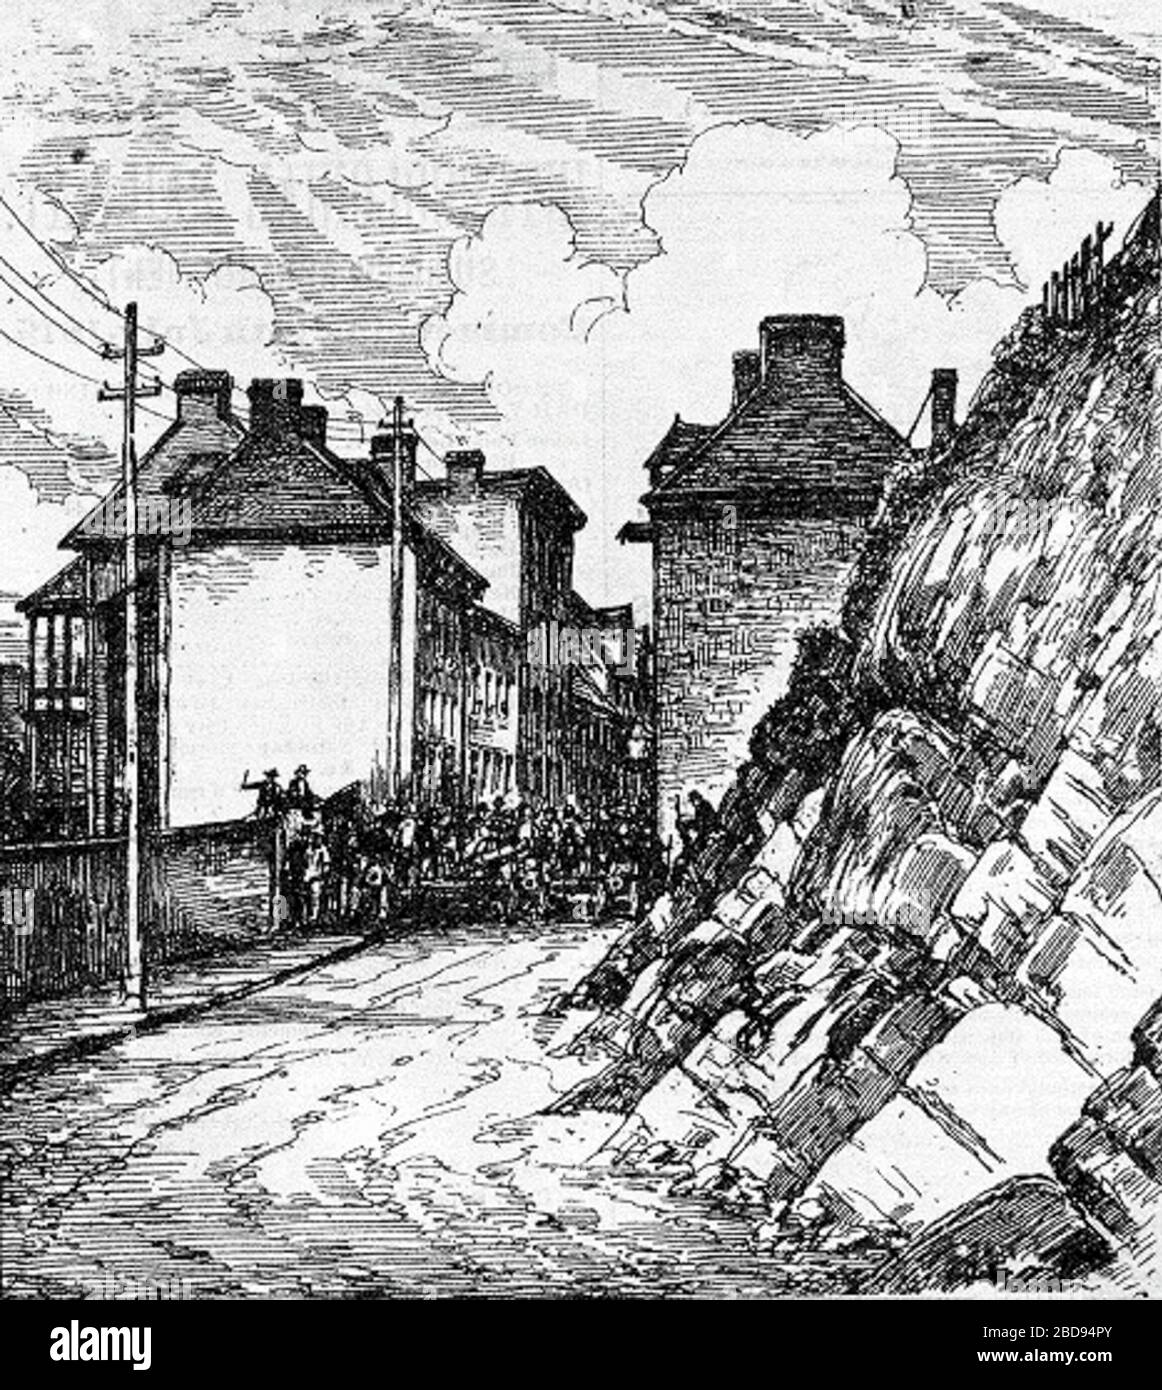 'English: The Quebec Riots. The Barricade on Champlain Street Français : Les émeutes de Québec. Barricades sur la rue Champlain.; 30 August 1879; Item: The Quebec Riots. The Barricade on Champlain Street, at Libray and Archives Canada, which reproduced it from Canadian Illustrated News, vol.XX, no. 9, p. 144, published 30 August 1879.; Unknown author; ' Stock Photo